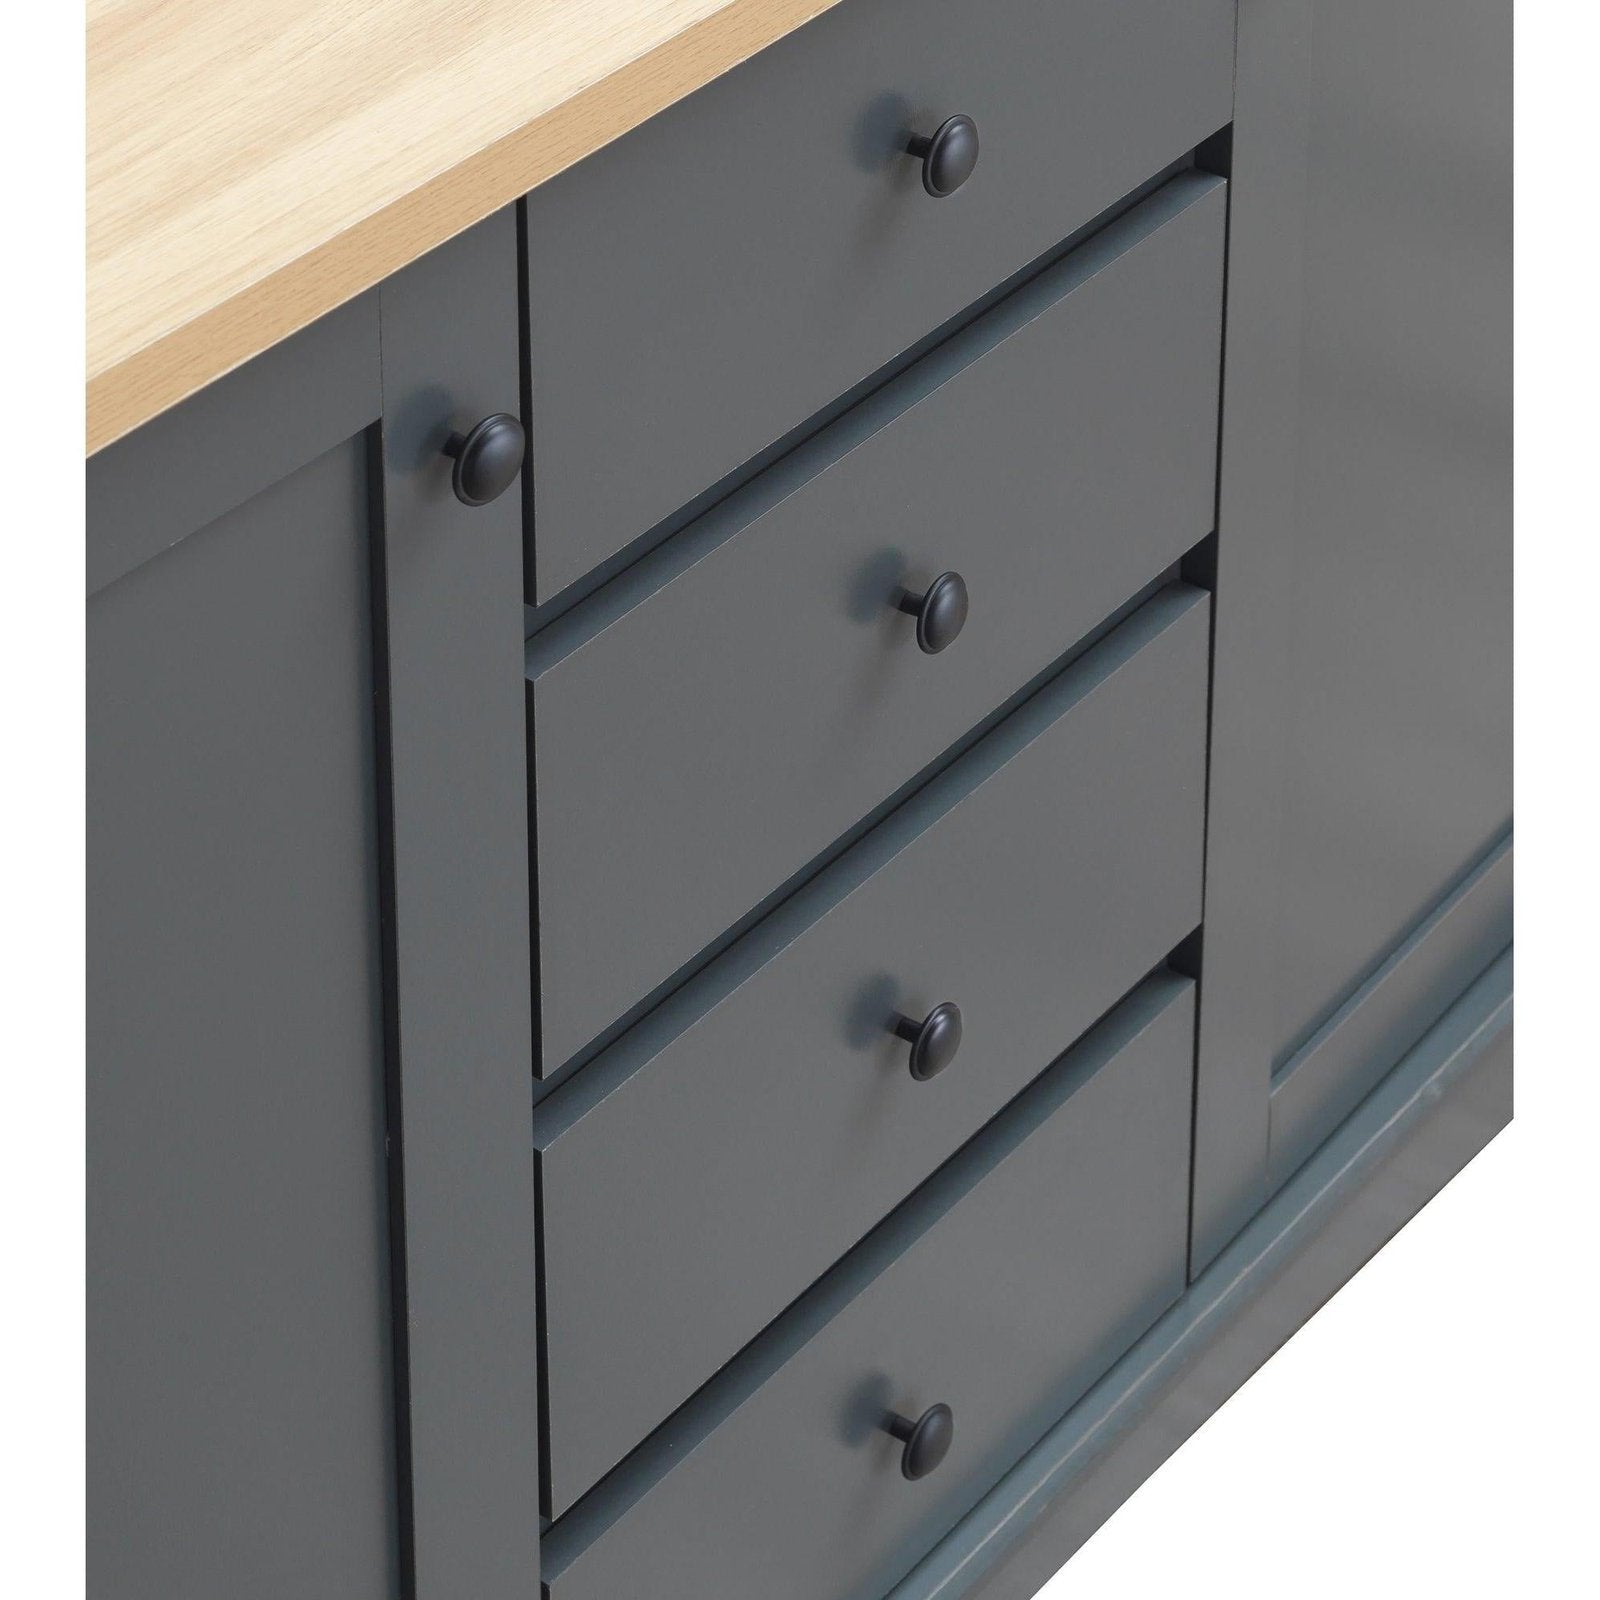 Carden Sideboard Doors Drawers allhomely